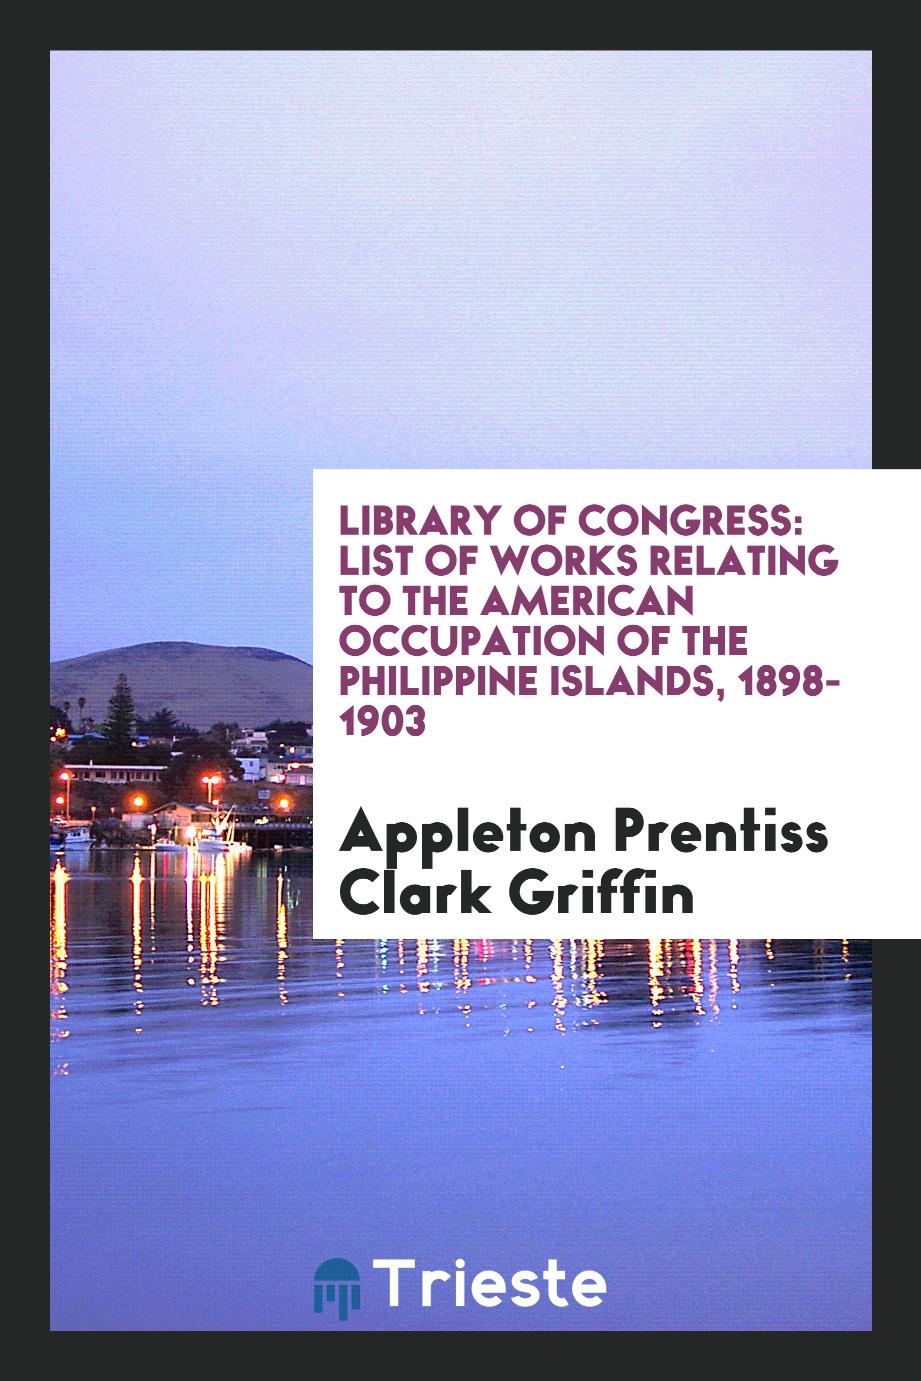 Library of Congress: List of Works Relating to the American Occupation of the Philippine Islands, 1898-1903